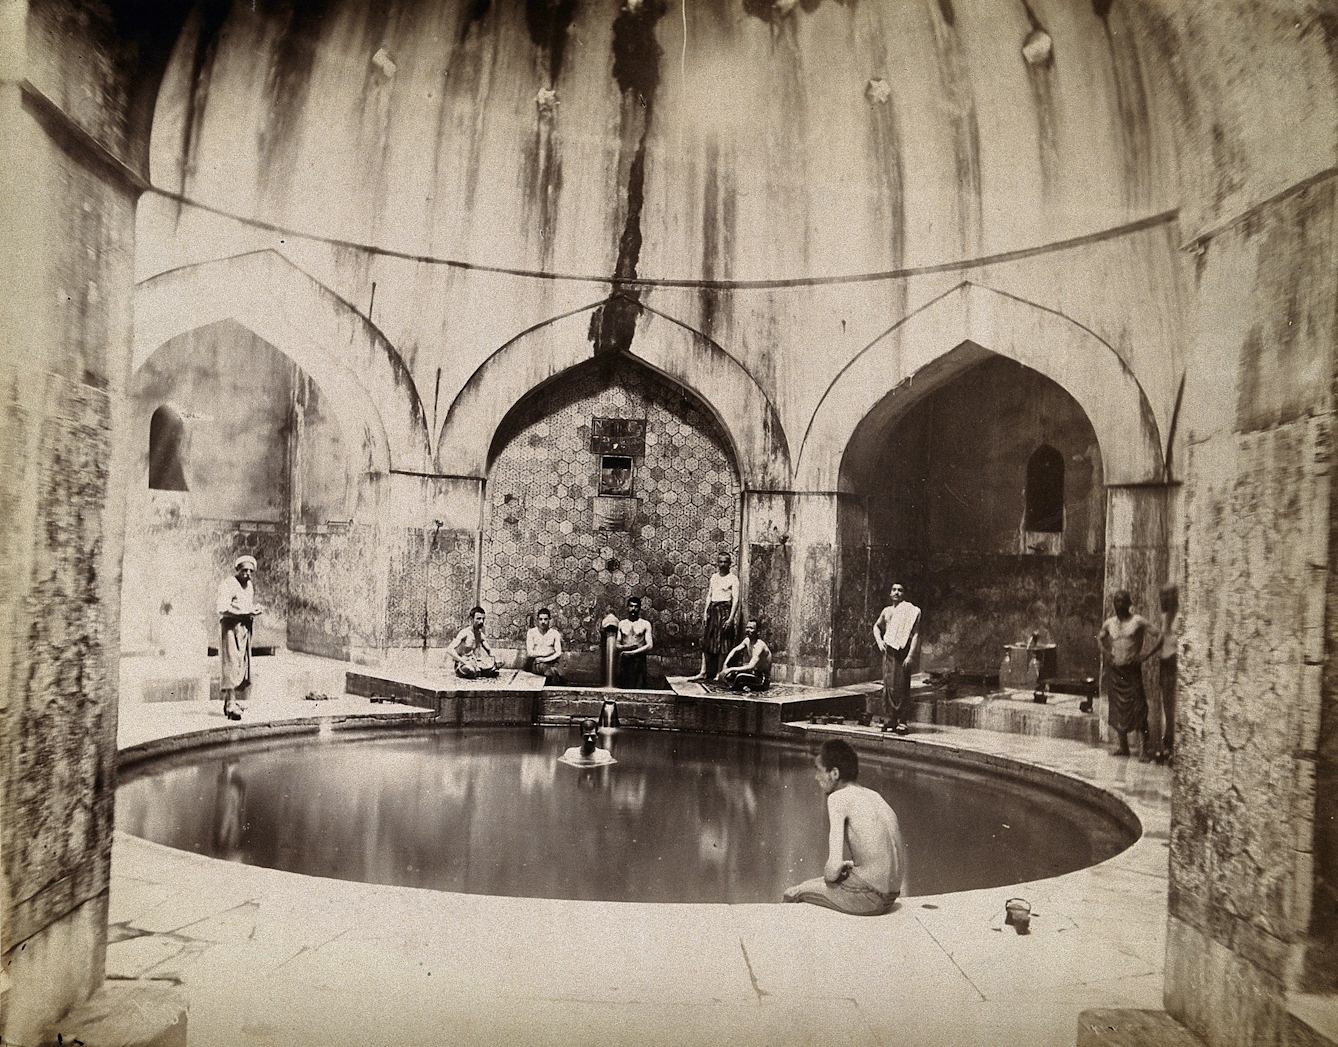 Black and white photograph showing men sitting around the sides of a circular pool in a domed building.